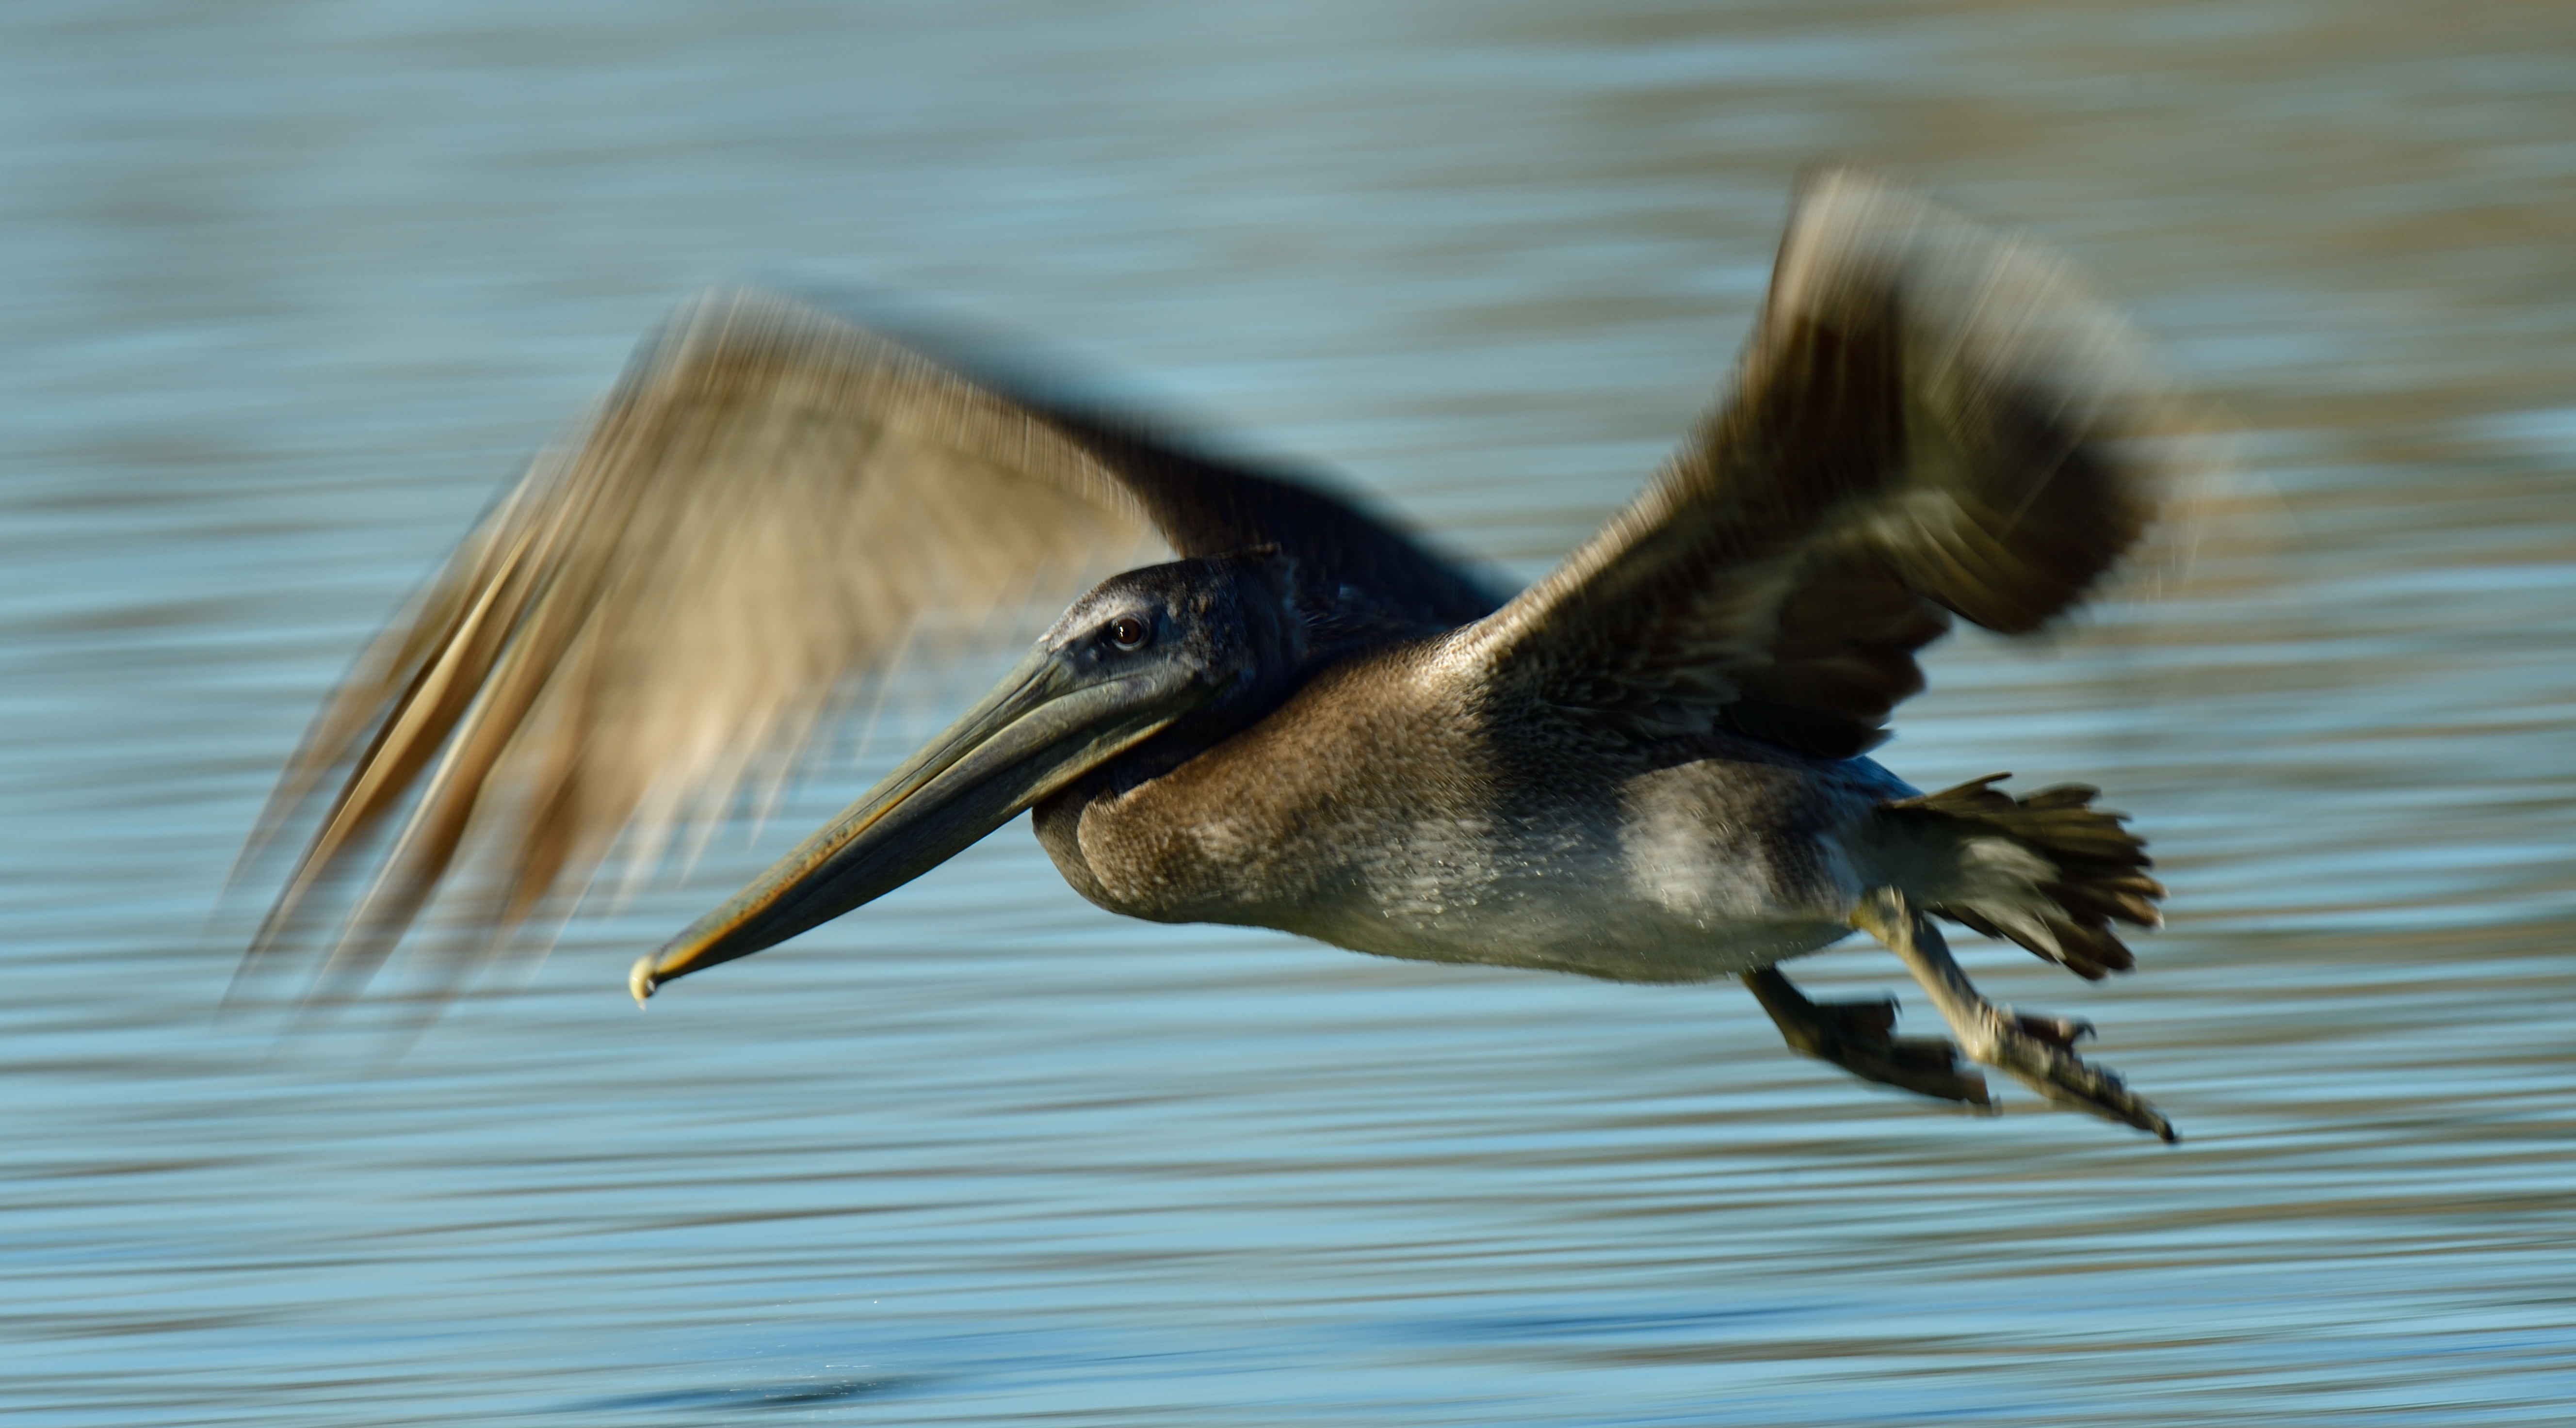 A slow shutter speed accentuates the motion of a brown pelican as it flies over Aquatic Park in Berkeley, CA.